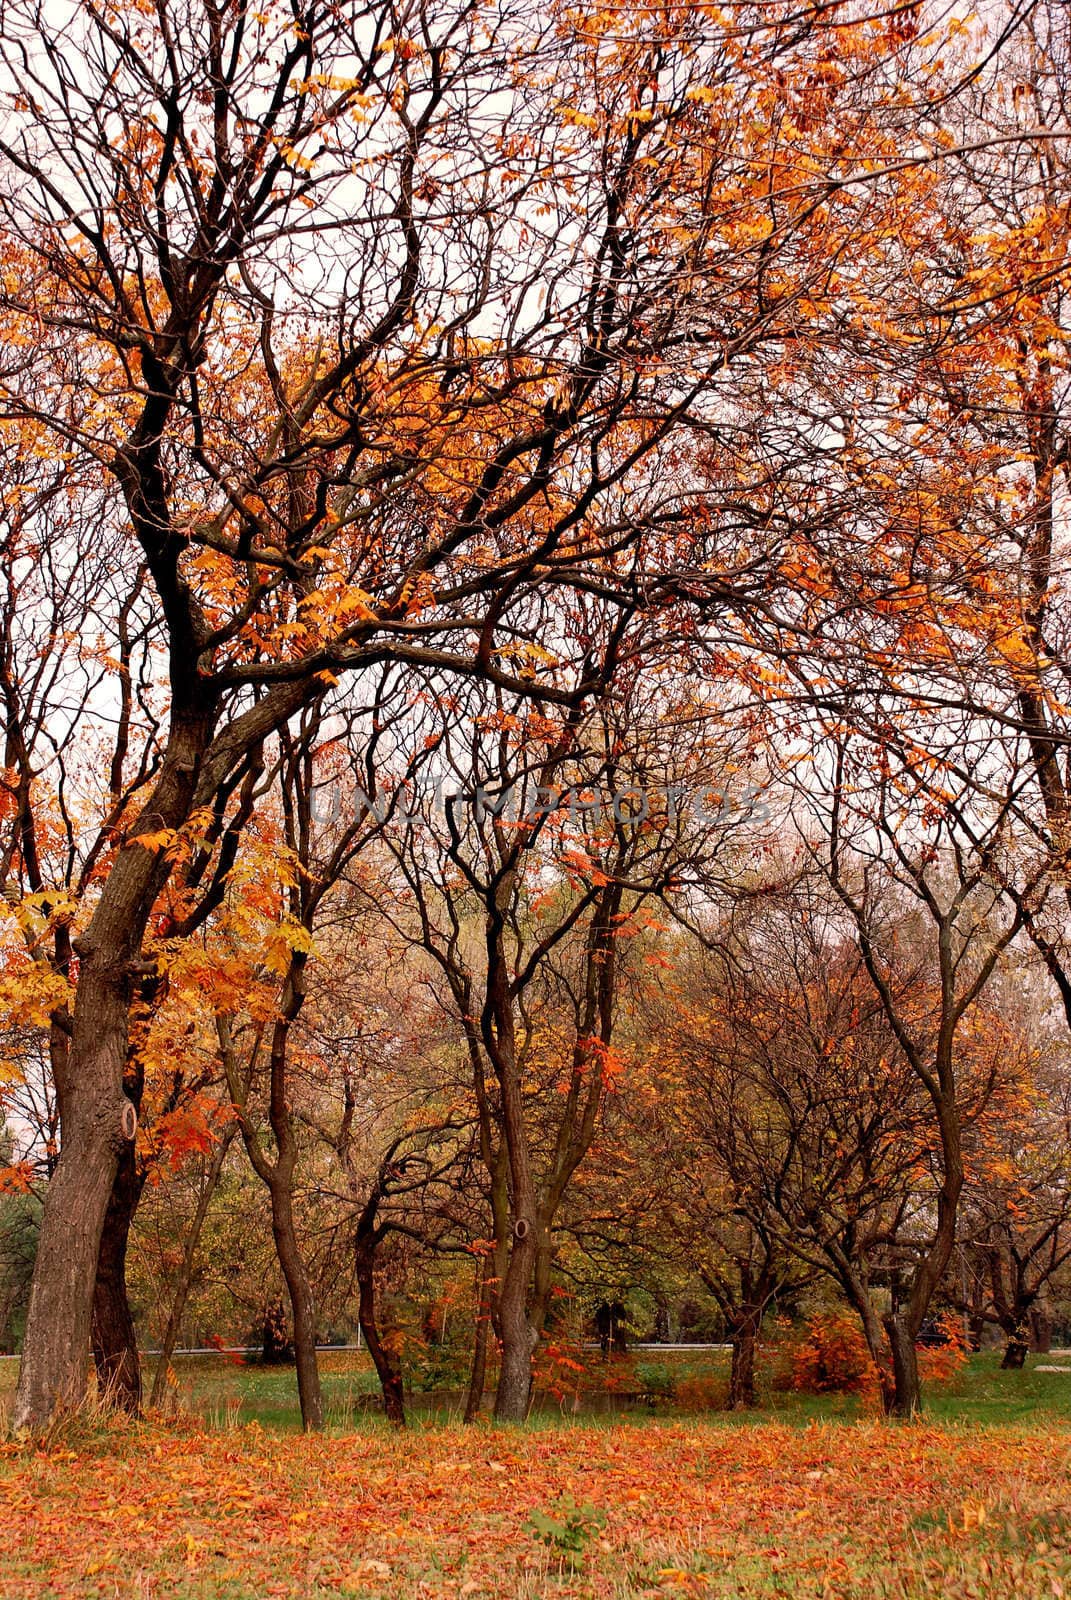 autumn trees with red, orange and yellow leaves in park